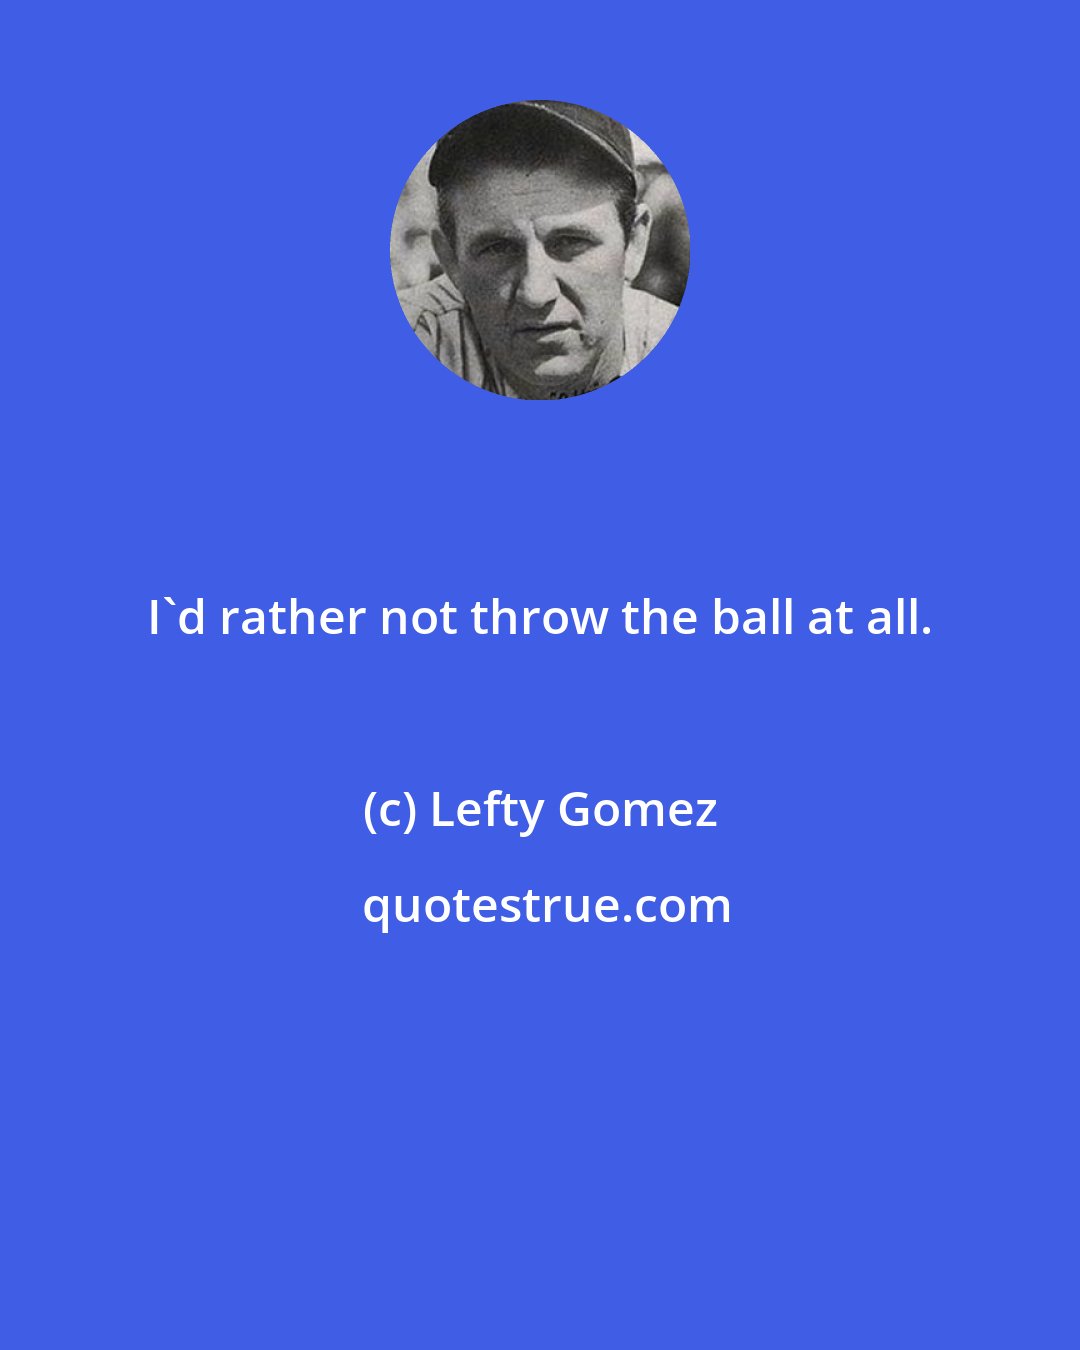 Lefty Gomez: I'd rather not throw the ball at all.